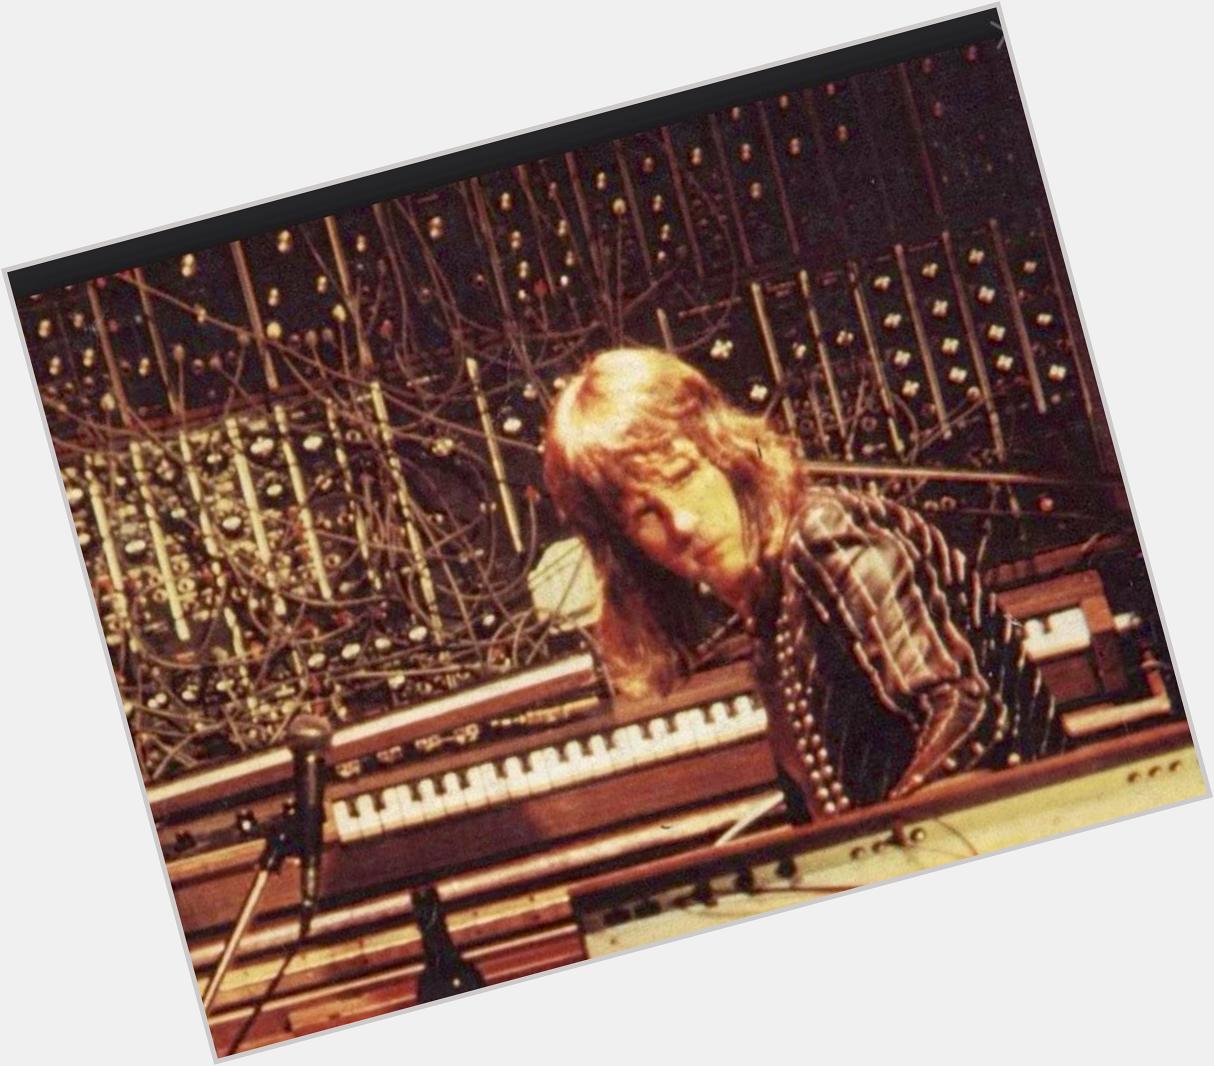 11/2/1944 Happy Birthday, Keith Emerson, founding member and keyboards of Emerson, Lake & Palmer 